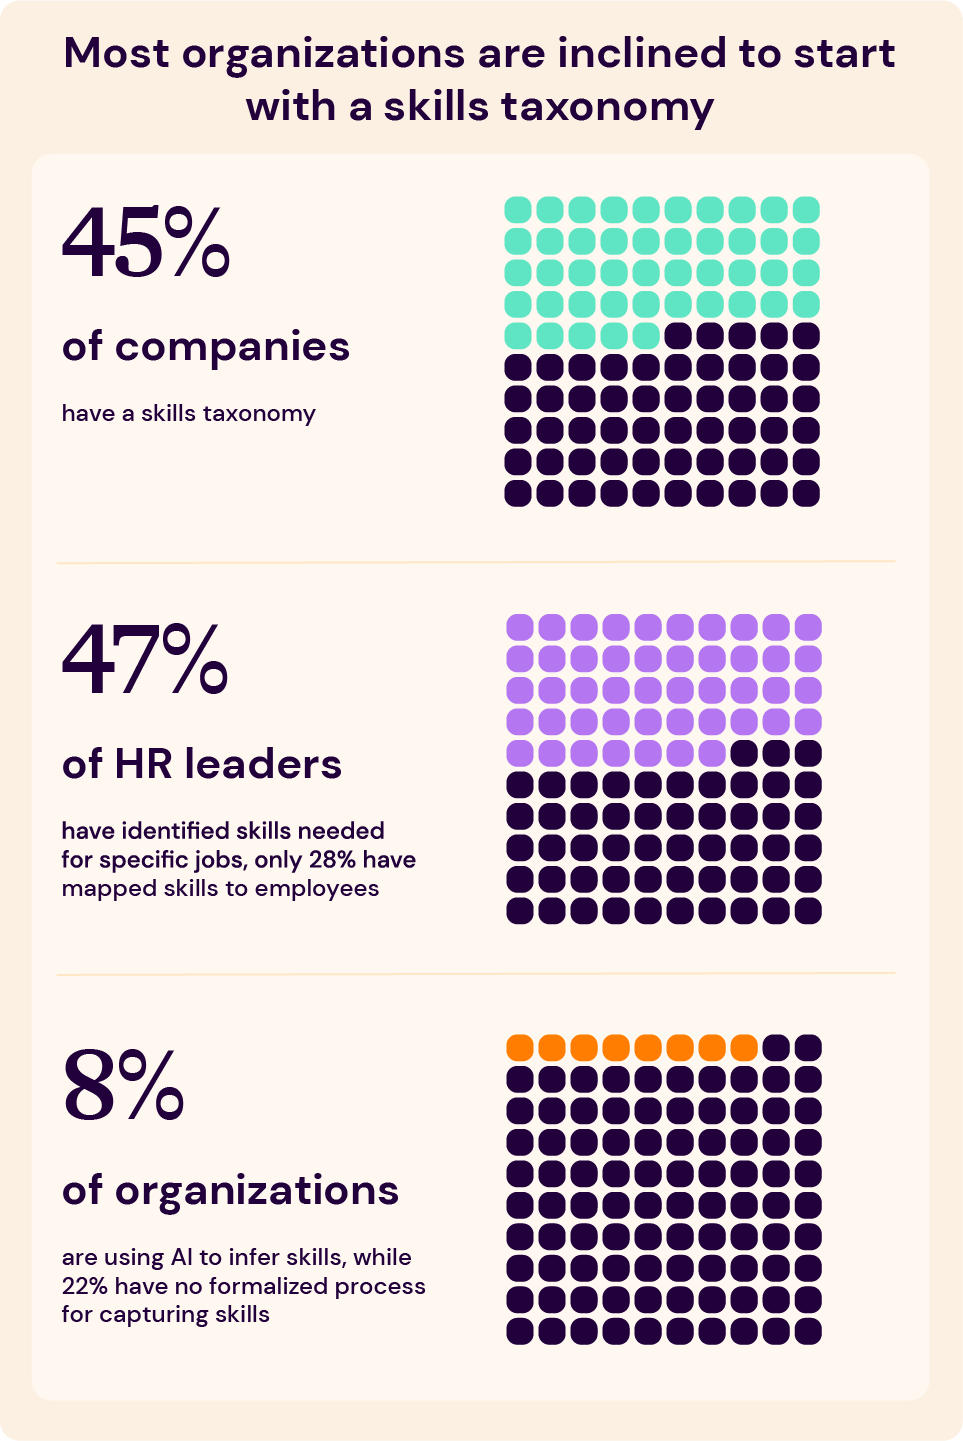 An excerpt from SeekOut's skills-based journey infographic featuring data from Mercer that explains that most organizations are inclined to start with a skills taxonomy as a way to understand the skills their organization has and needs; 45% of companies have a skills taxonomy; 47% of HR leaders have identified skills needed for specific jobs, while only 28% have mapped skills to employees; 8% of organizations are using AI to infer skills; while 22% have no formalized process for capturing skills.